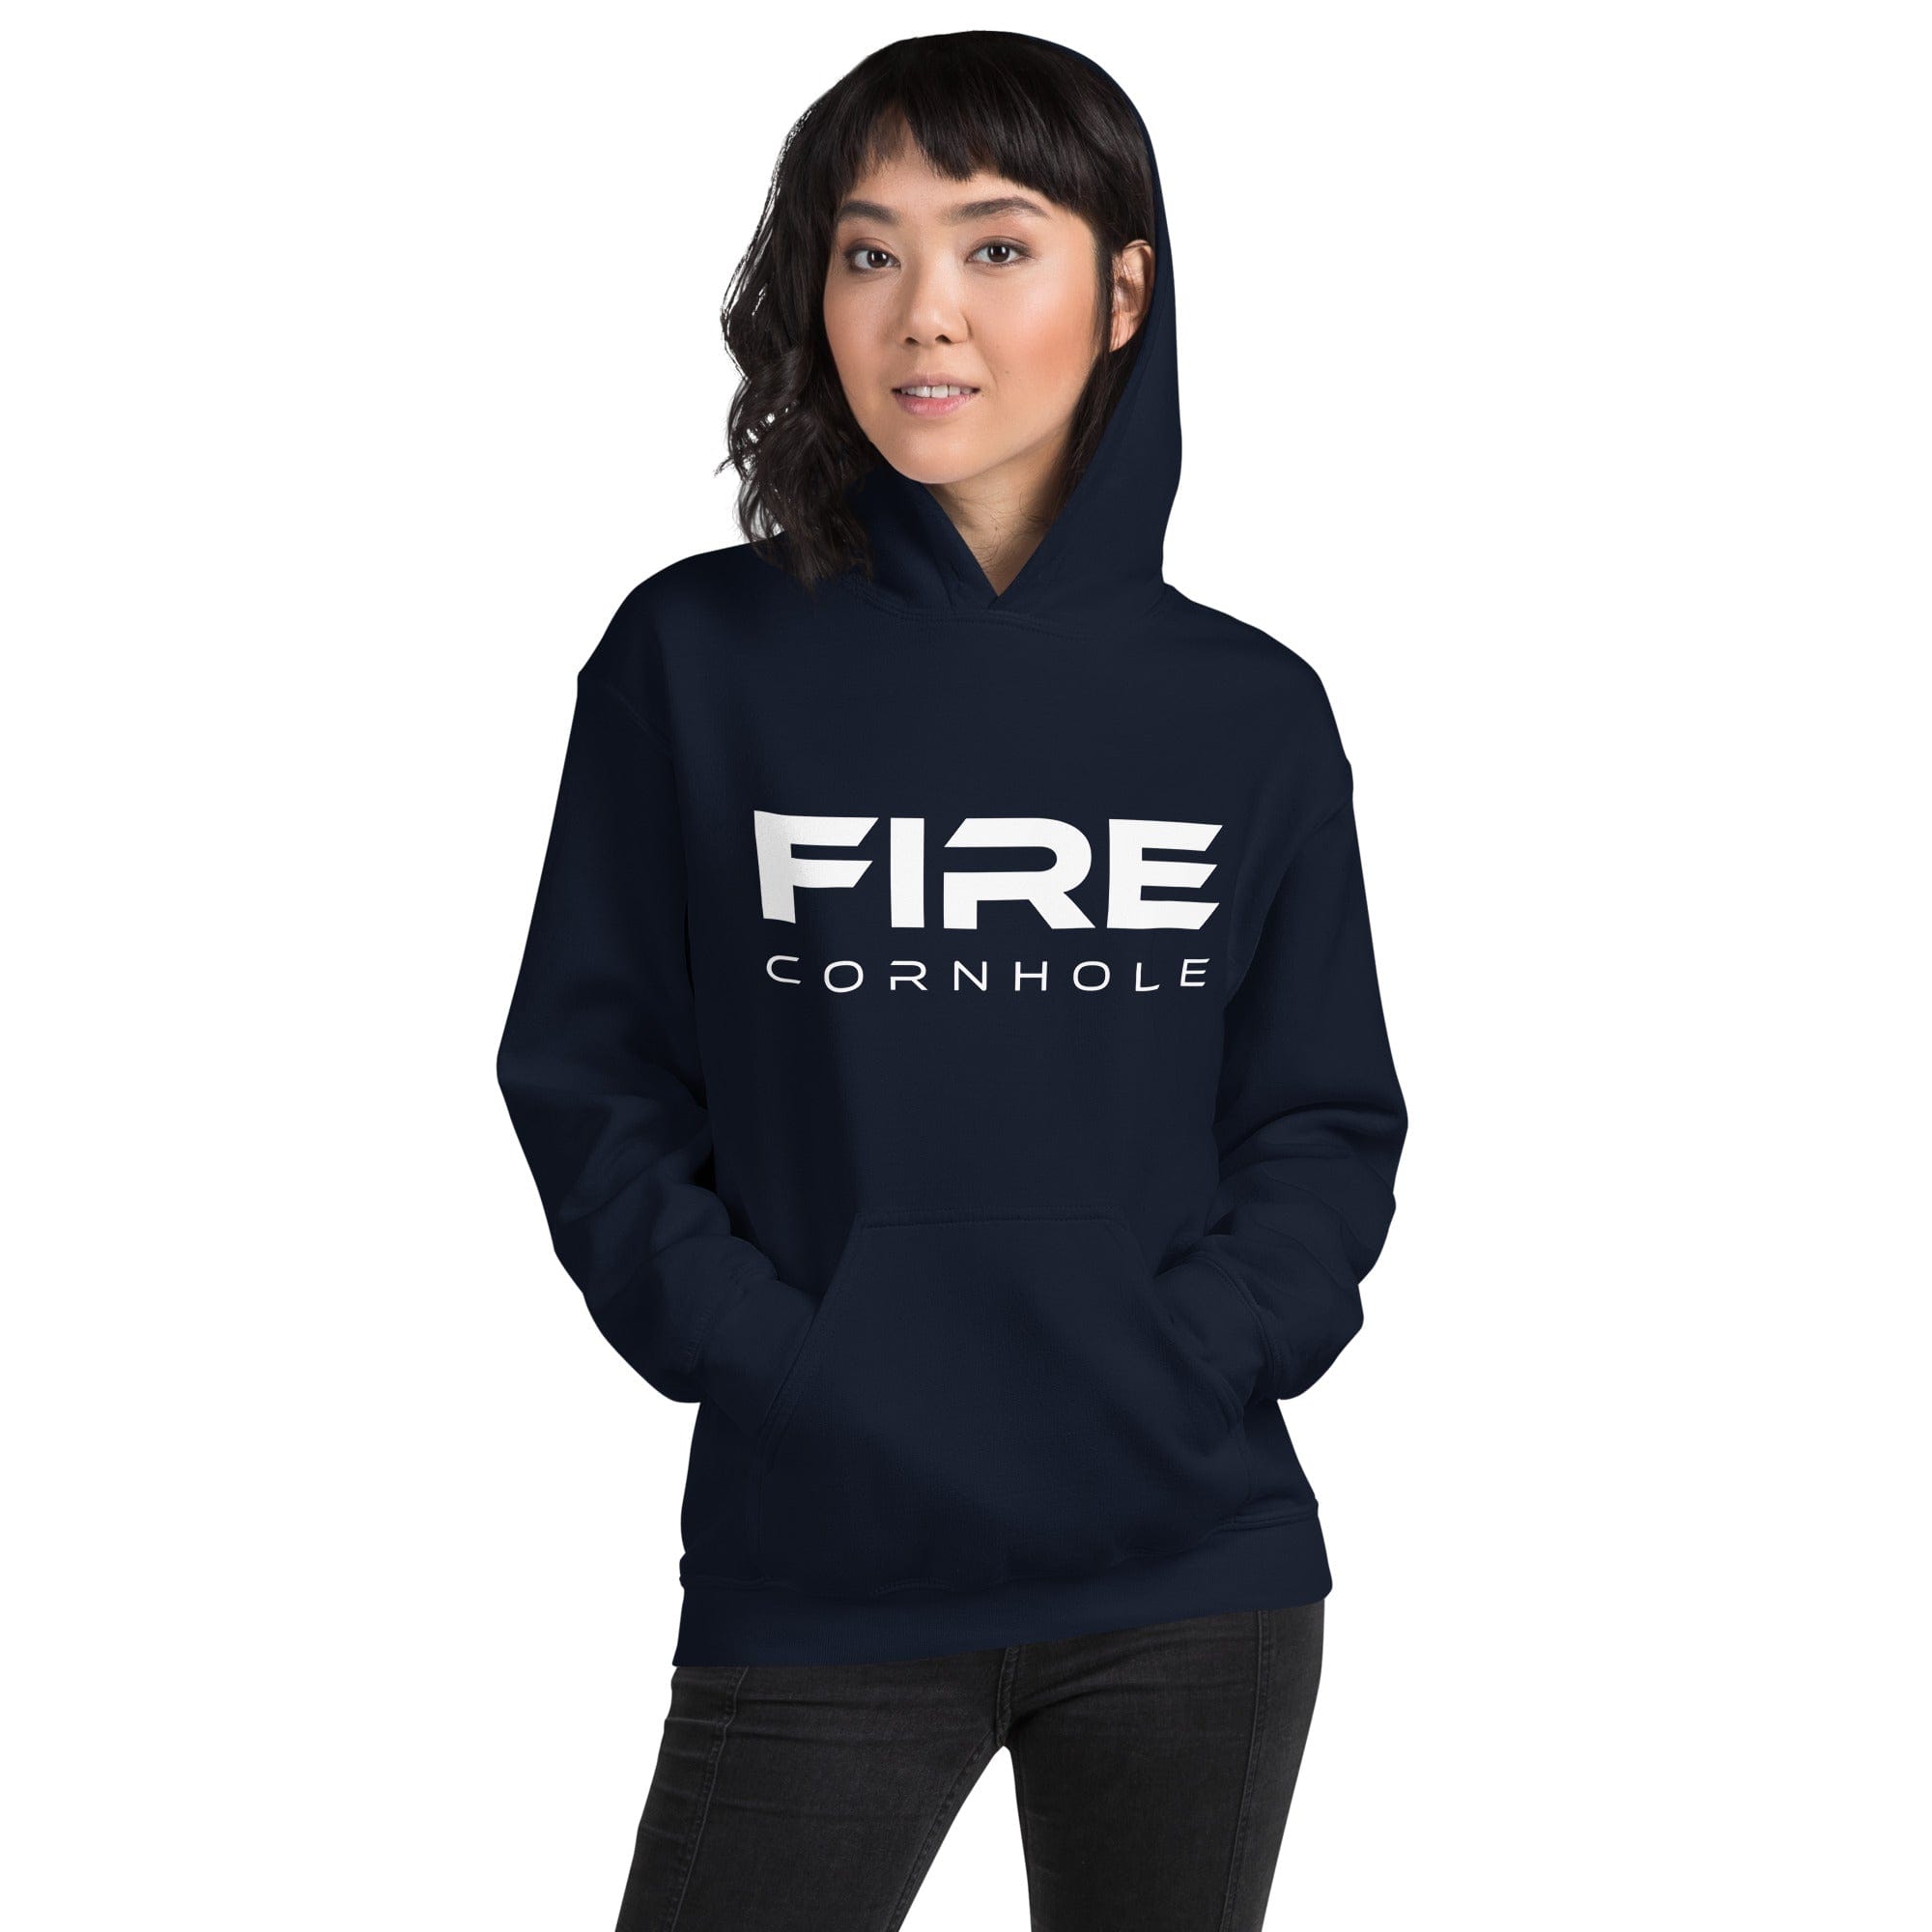 Navy unisex cotton hoodie with Fire Cornhole logo in white